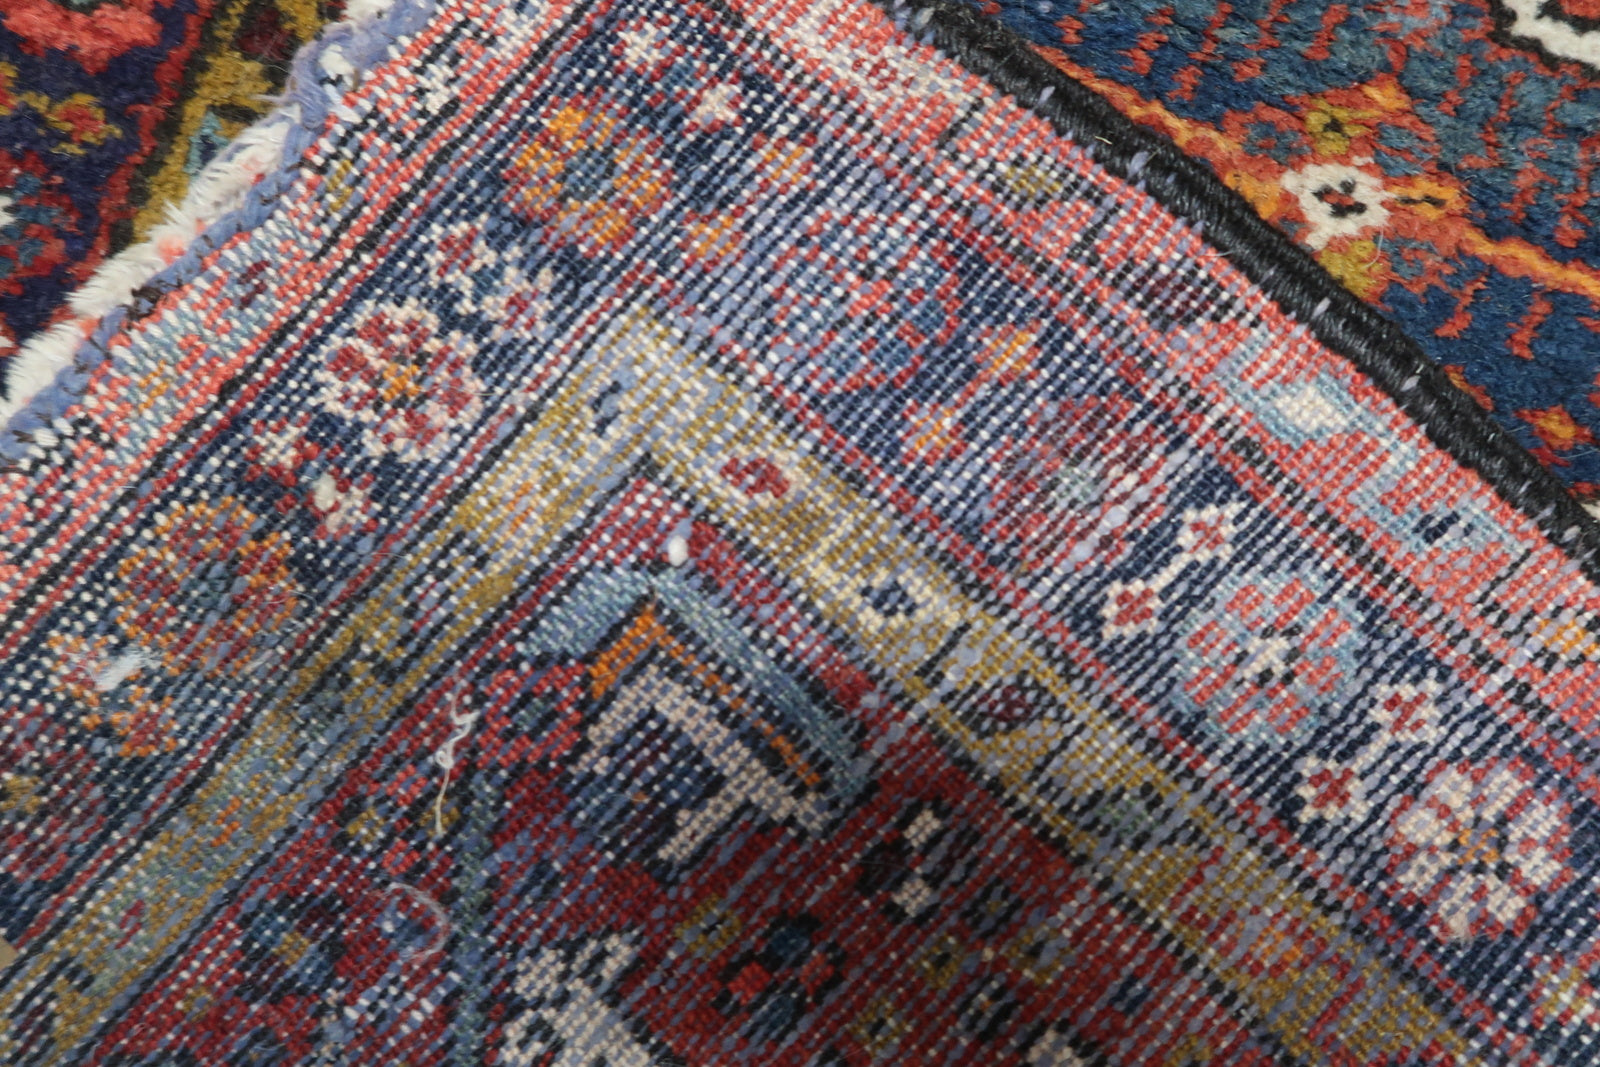 Back side of the Handmade Antique Persian Karajeh Rug, revealing its woven patterns and craftsmanship